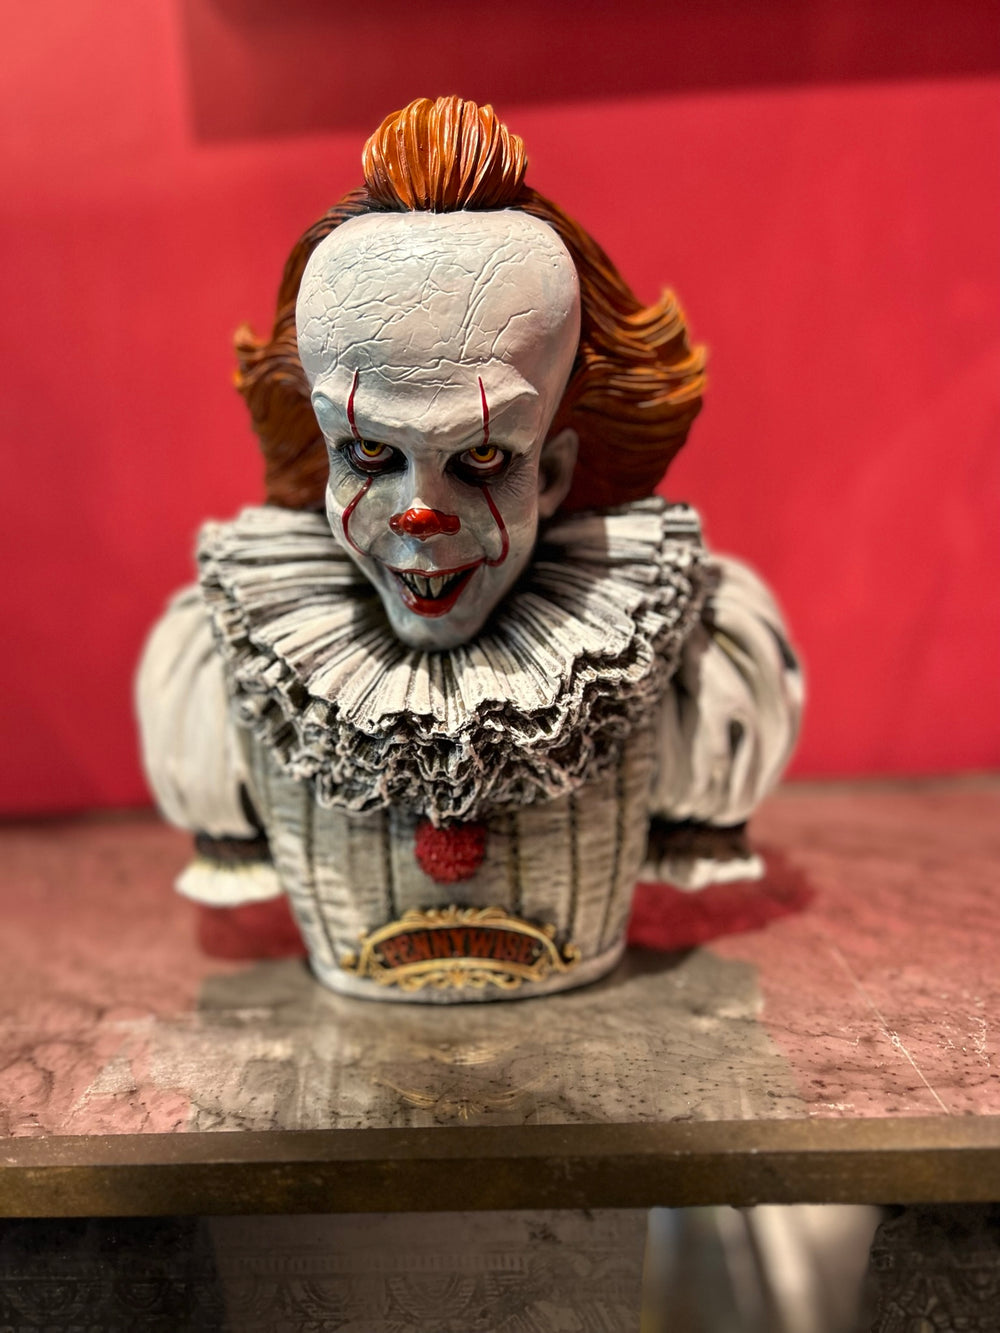 IT Pennywise Bust, Pennywise the Clown, Pennywise The Dancing Clown, Robert Gray